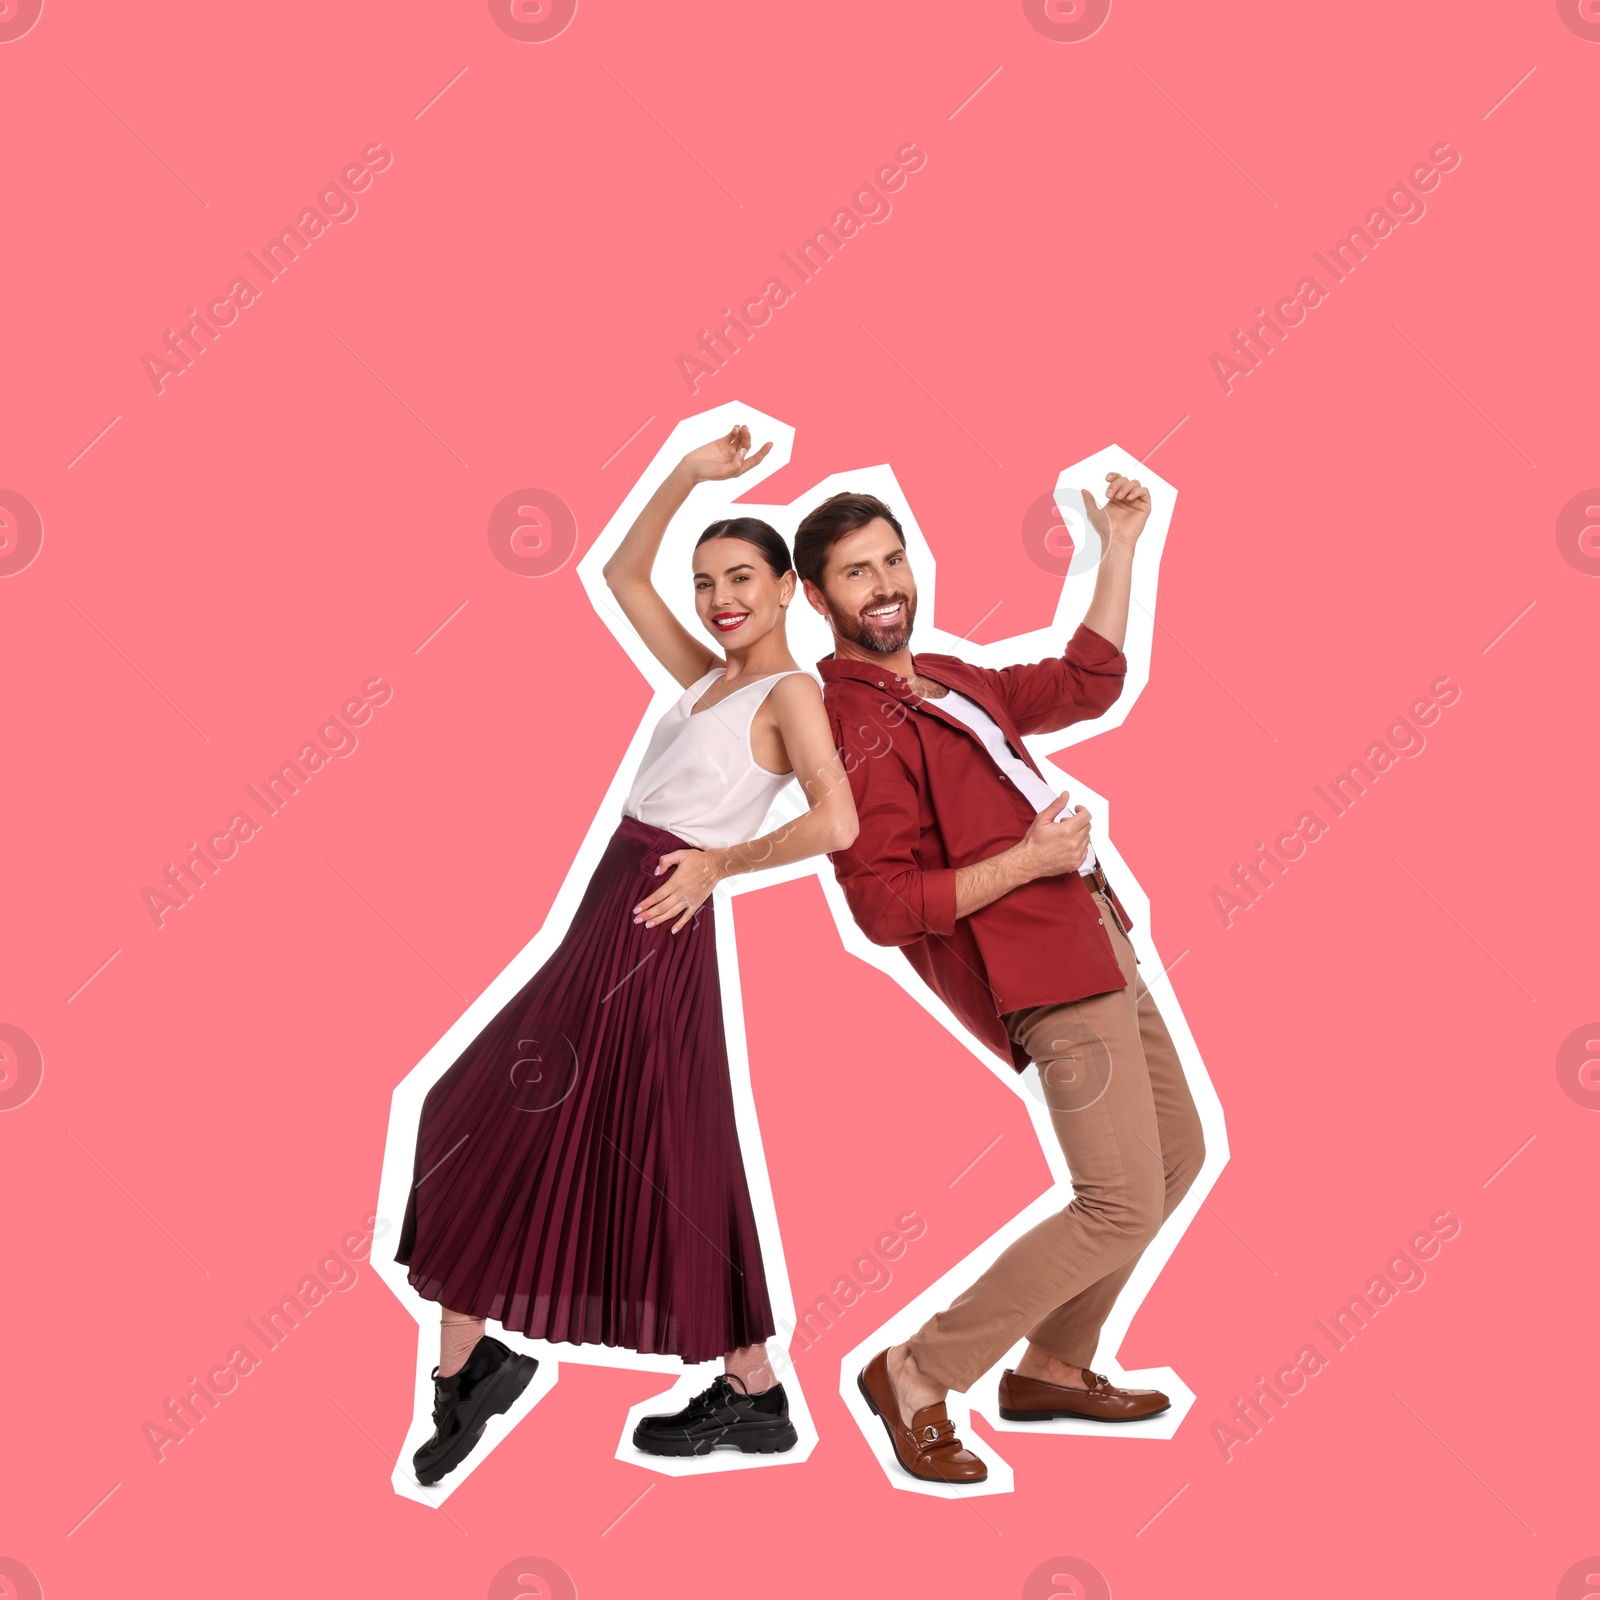 Image of Pop art poster. Happy couple dancing together on coral background